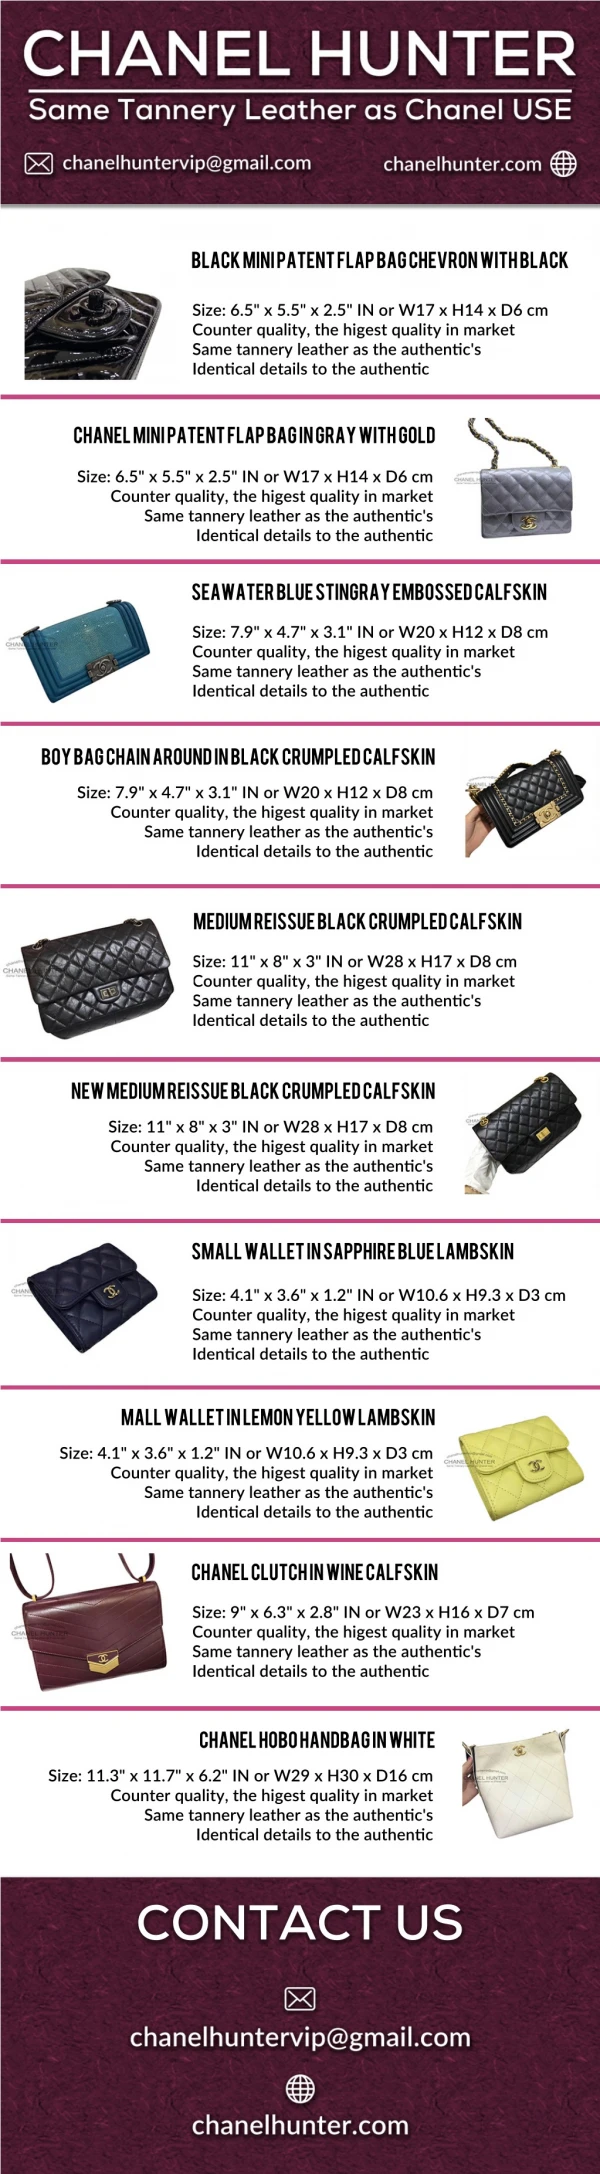 Buy The Best Replica Bags Online and Other Chanel Inspired Outlets